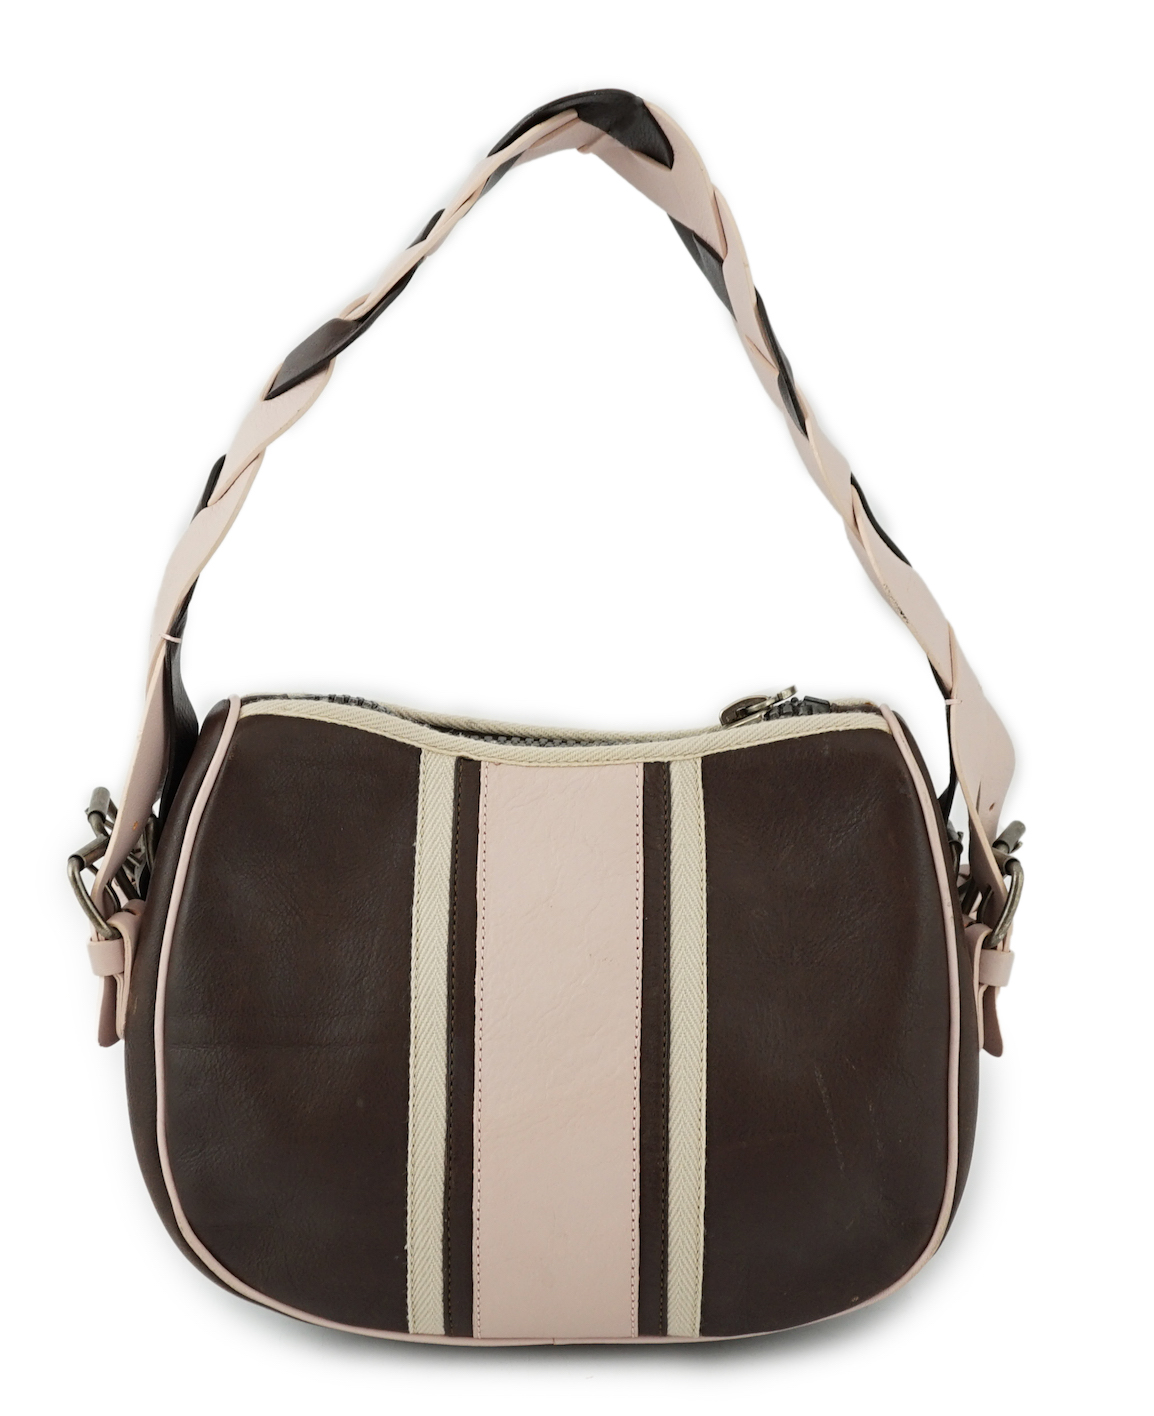 A Moschino Cheap and Chic brown and powder pink shoulder bag, height 18cm, height to handle 30cm, width 28cm, depth 15cm